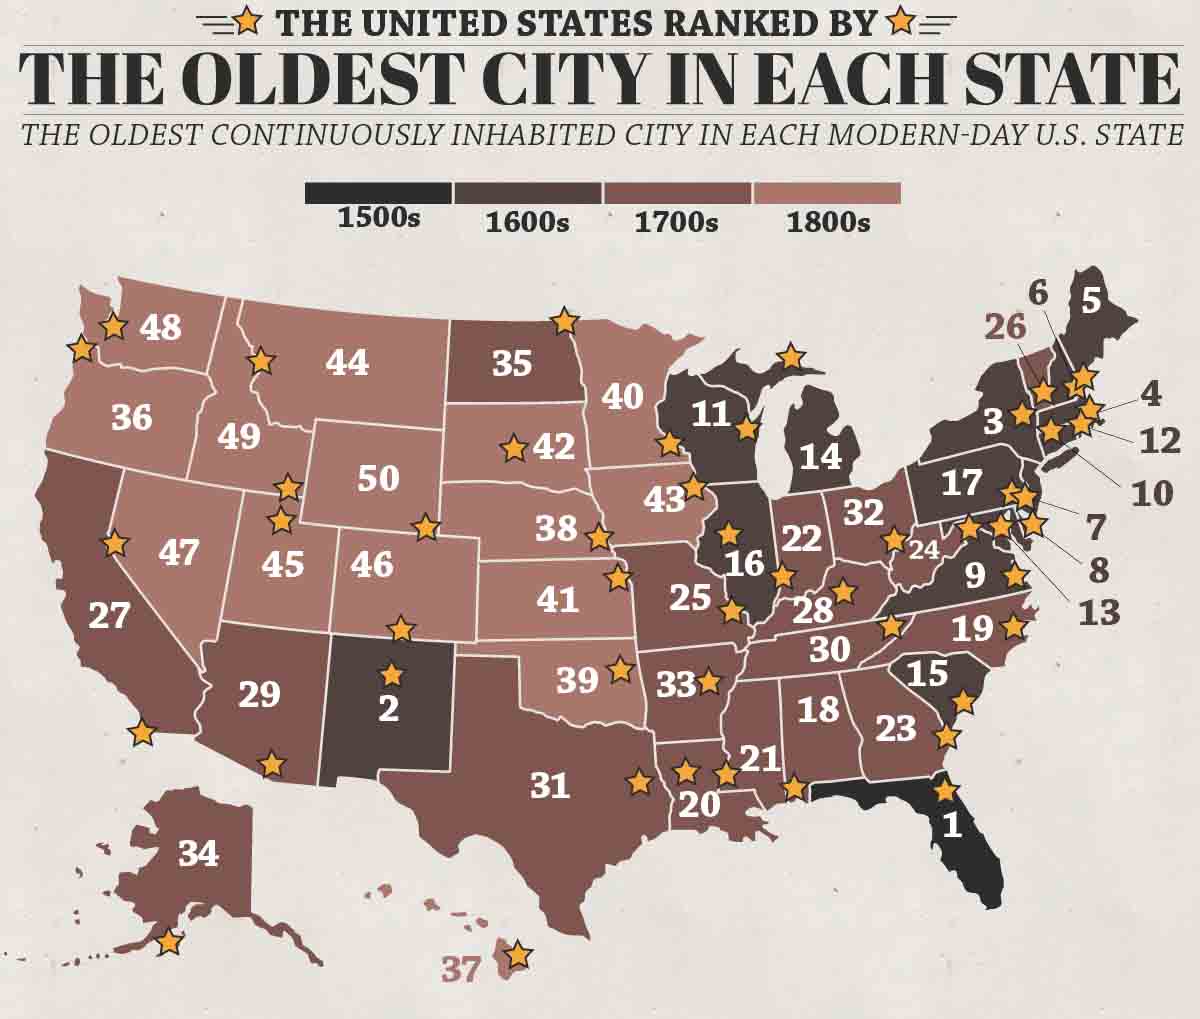 The United States Ranked By The Oldest City In Each State Infographic 4433